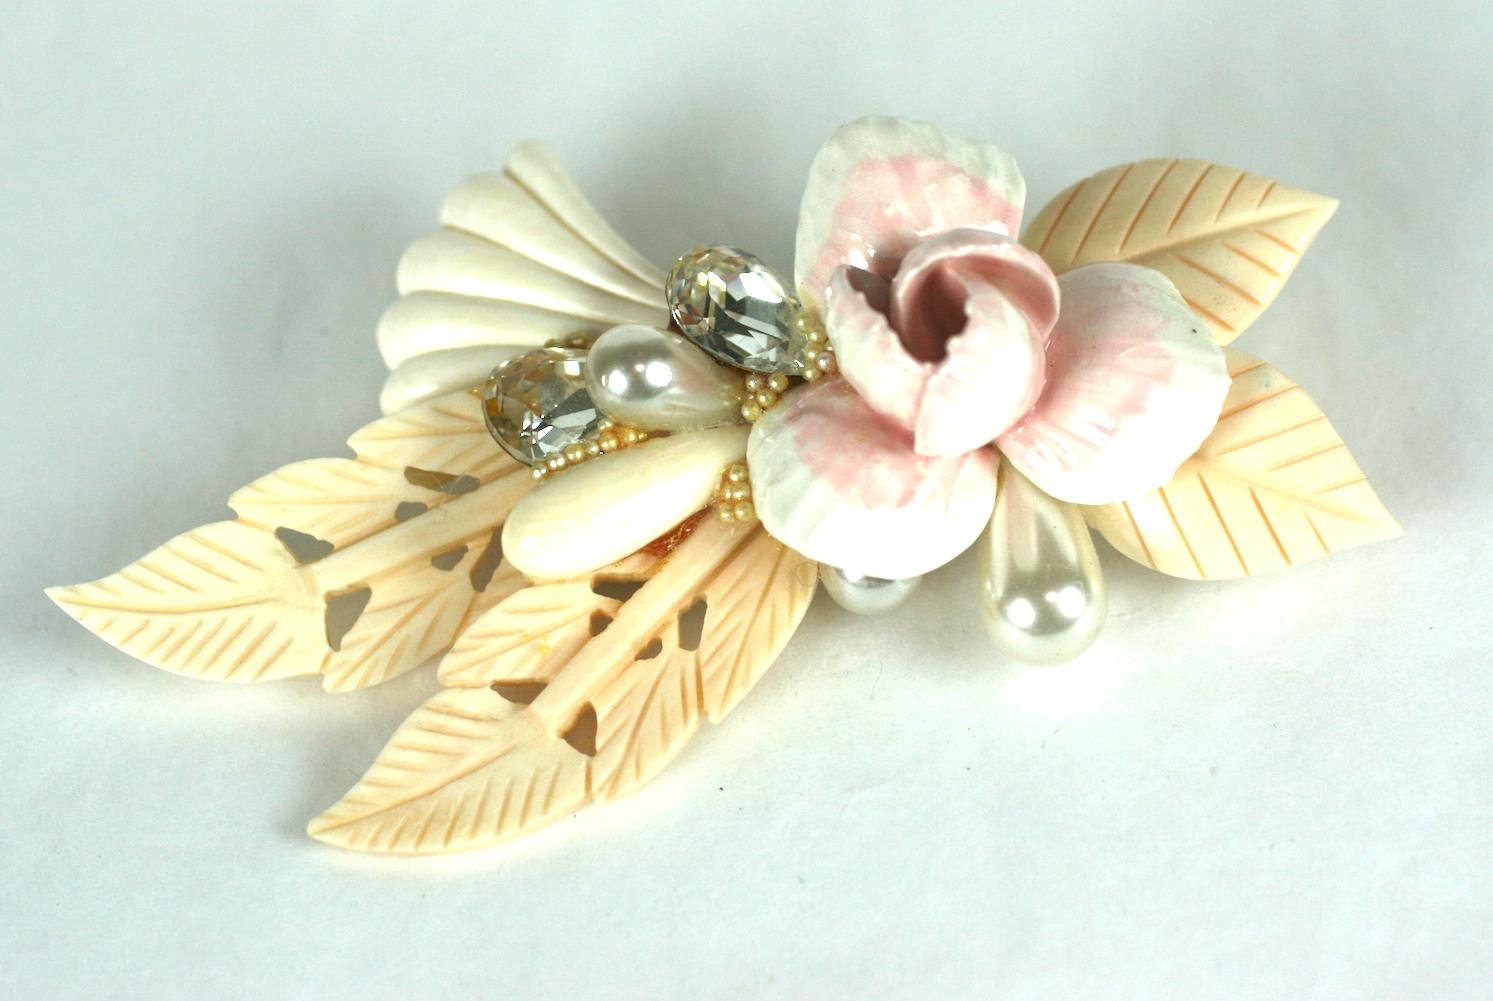 Large Wendy Gell jeweled Dresden porcelain and hand carved shell floral brooch from the 1980's. Wendy Gell hot glue gunned her way to fame by assembling fantastical and charming pastiches of found objects mixed with Swarovski crystals. Very over the